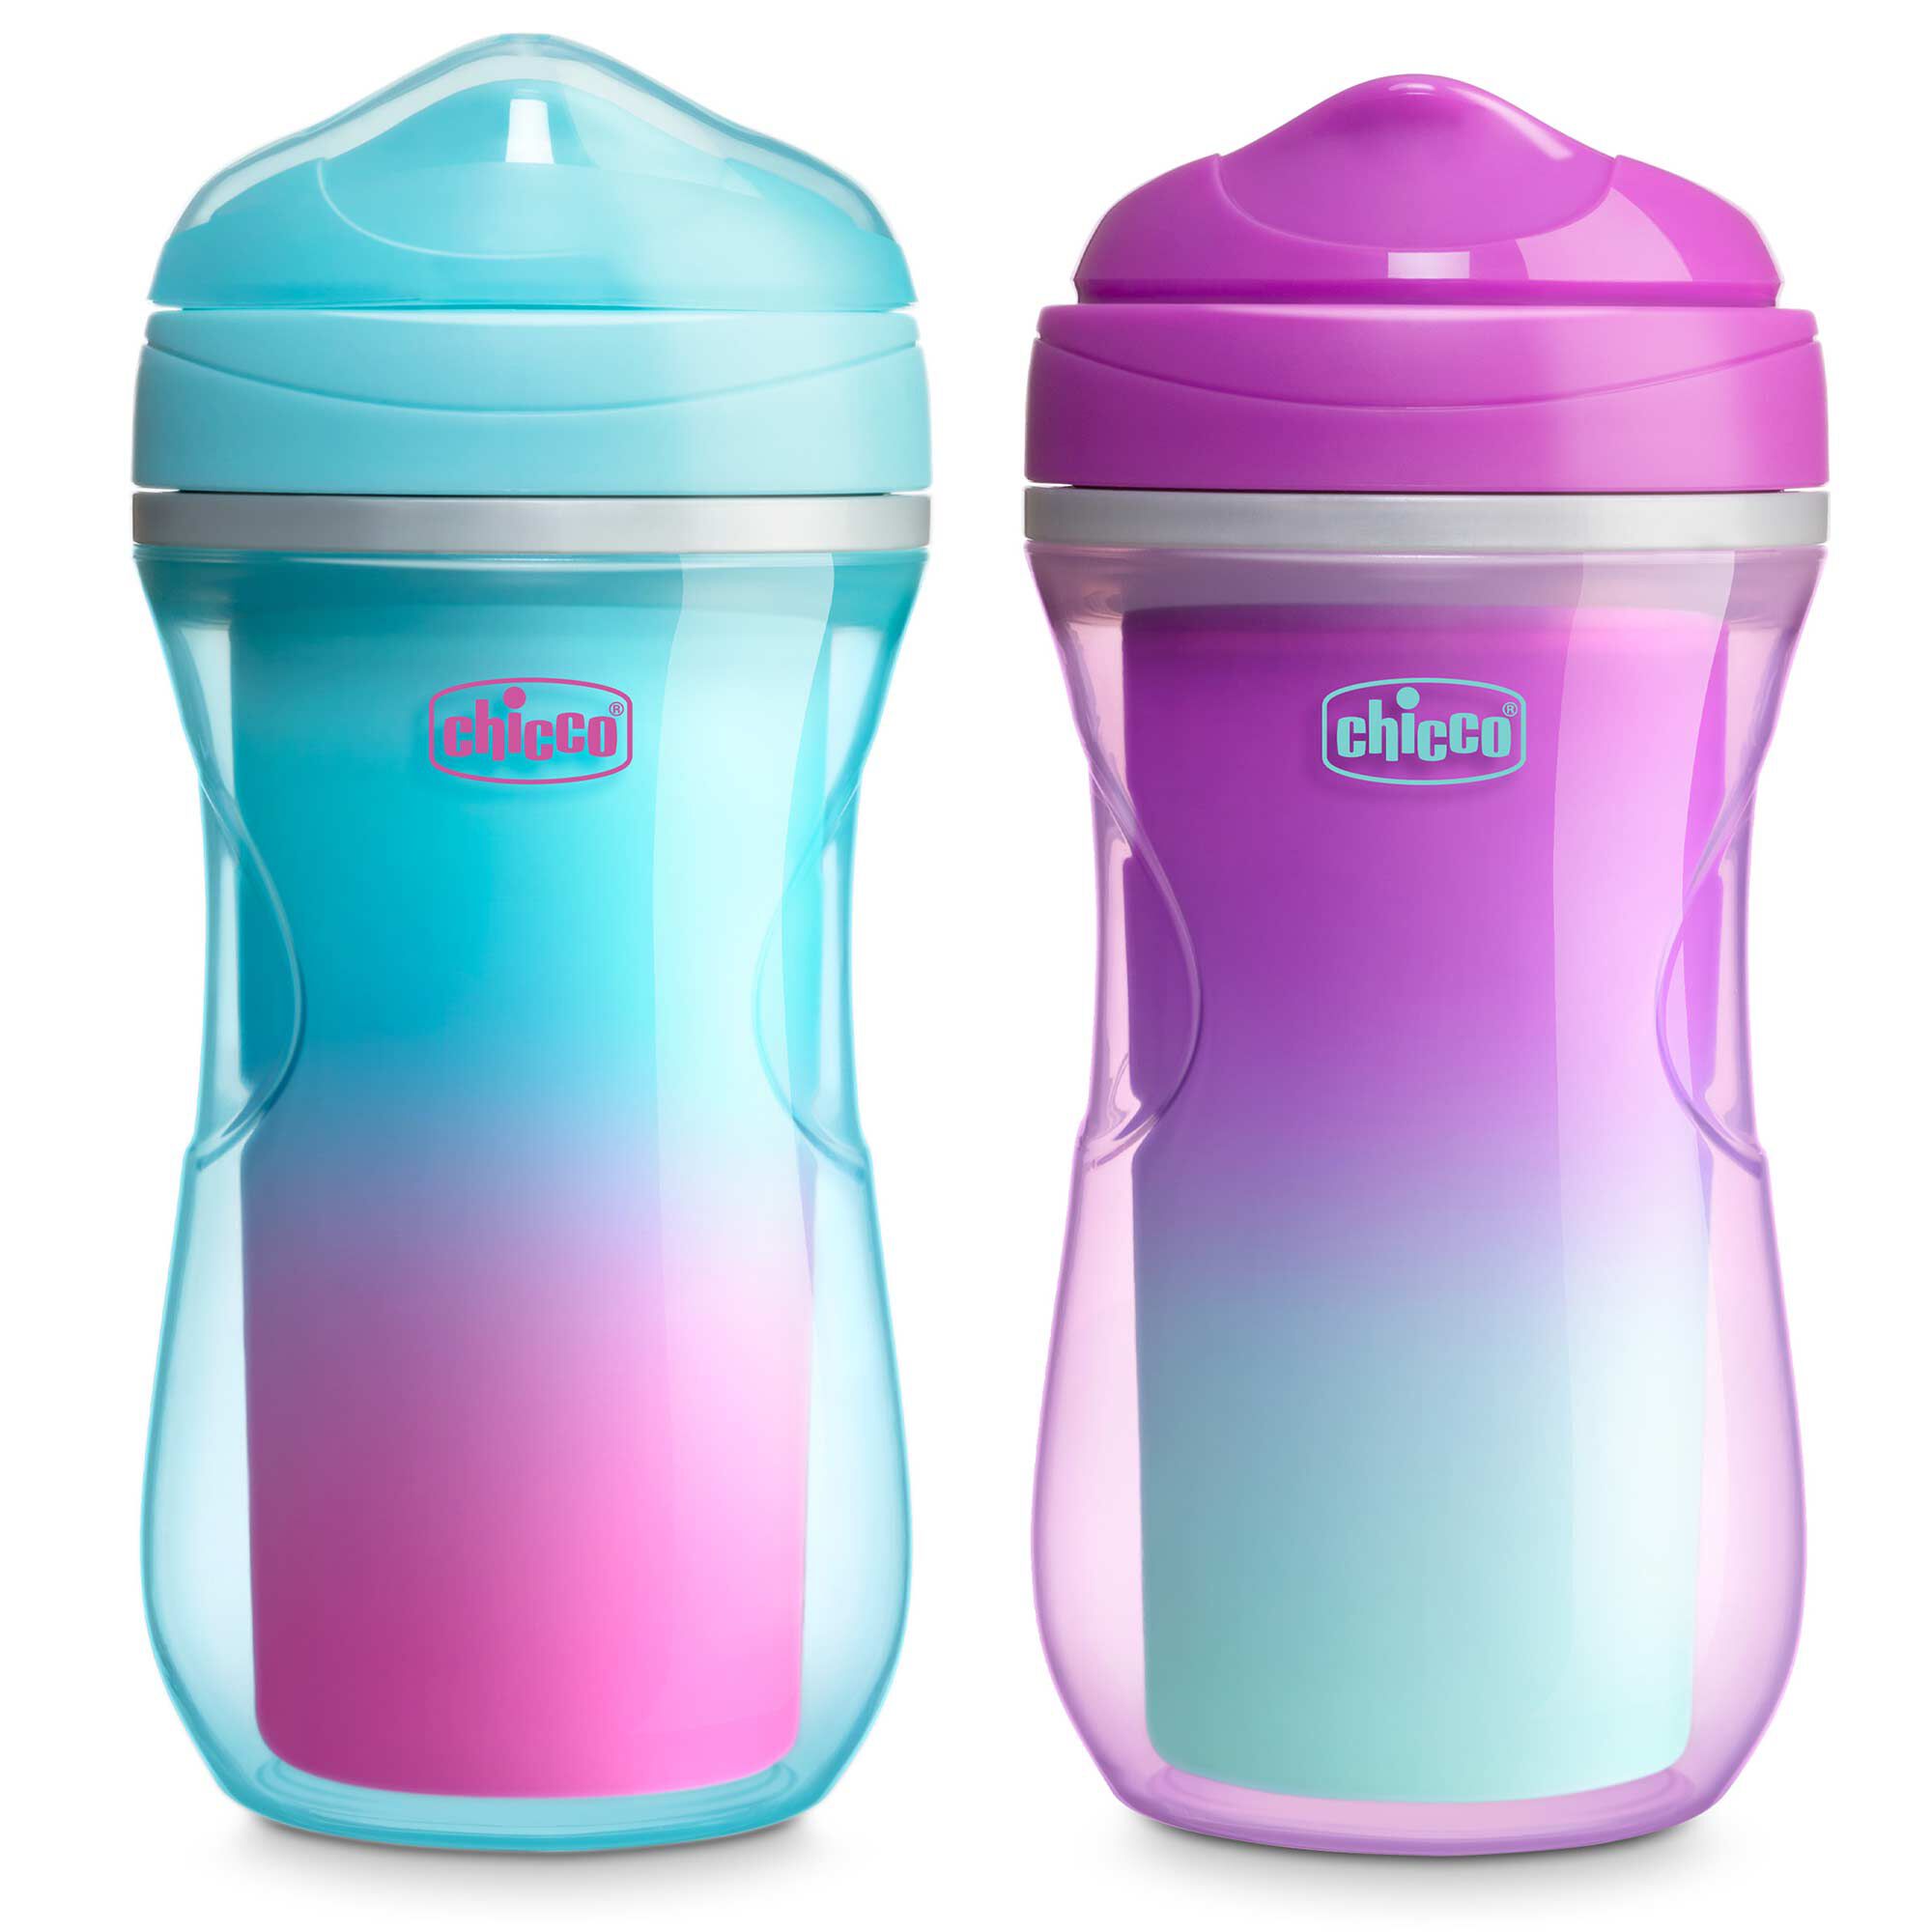 https://www.chiccousa.com/dw/image/v2/AAMT_PRD/on/demandware.static/-/Sites-chicco_catalog/default/dwec6c2d77/images/products/feeding/insulated-rim/chicco-insulated-rim-spout-trainer-pink-teal-purple.jpg?sw=2000&sh=2000&sm=fit